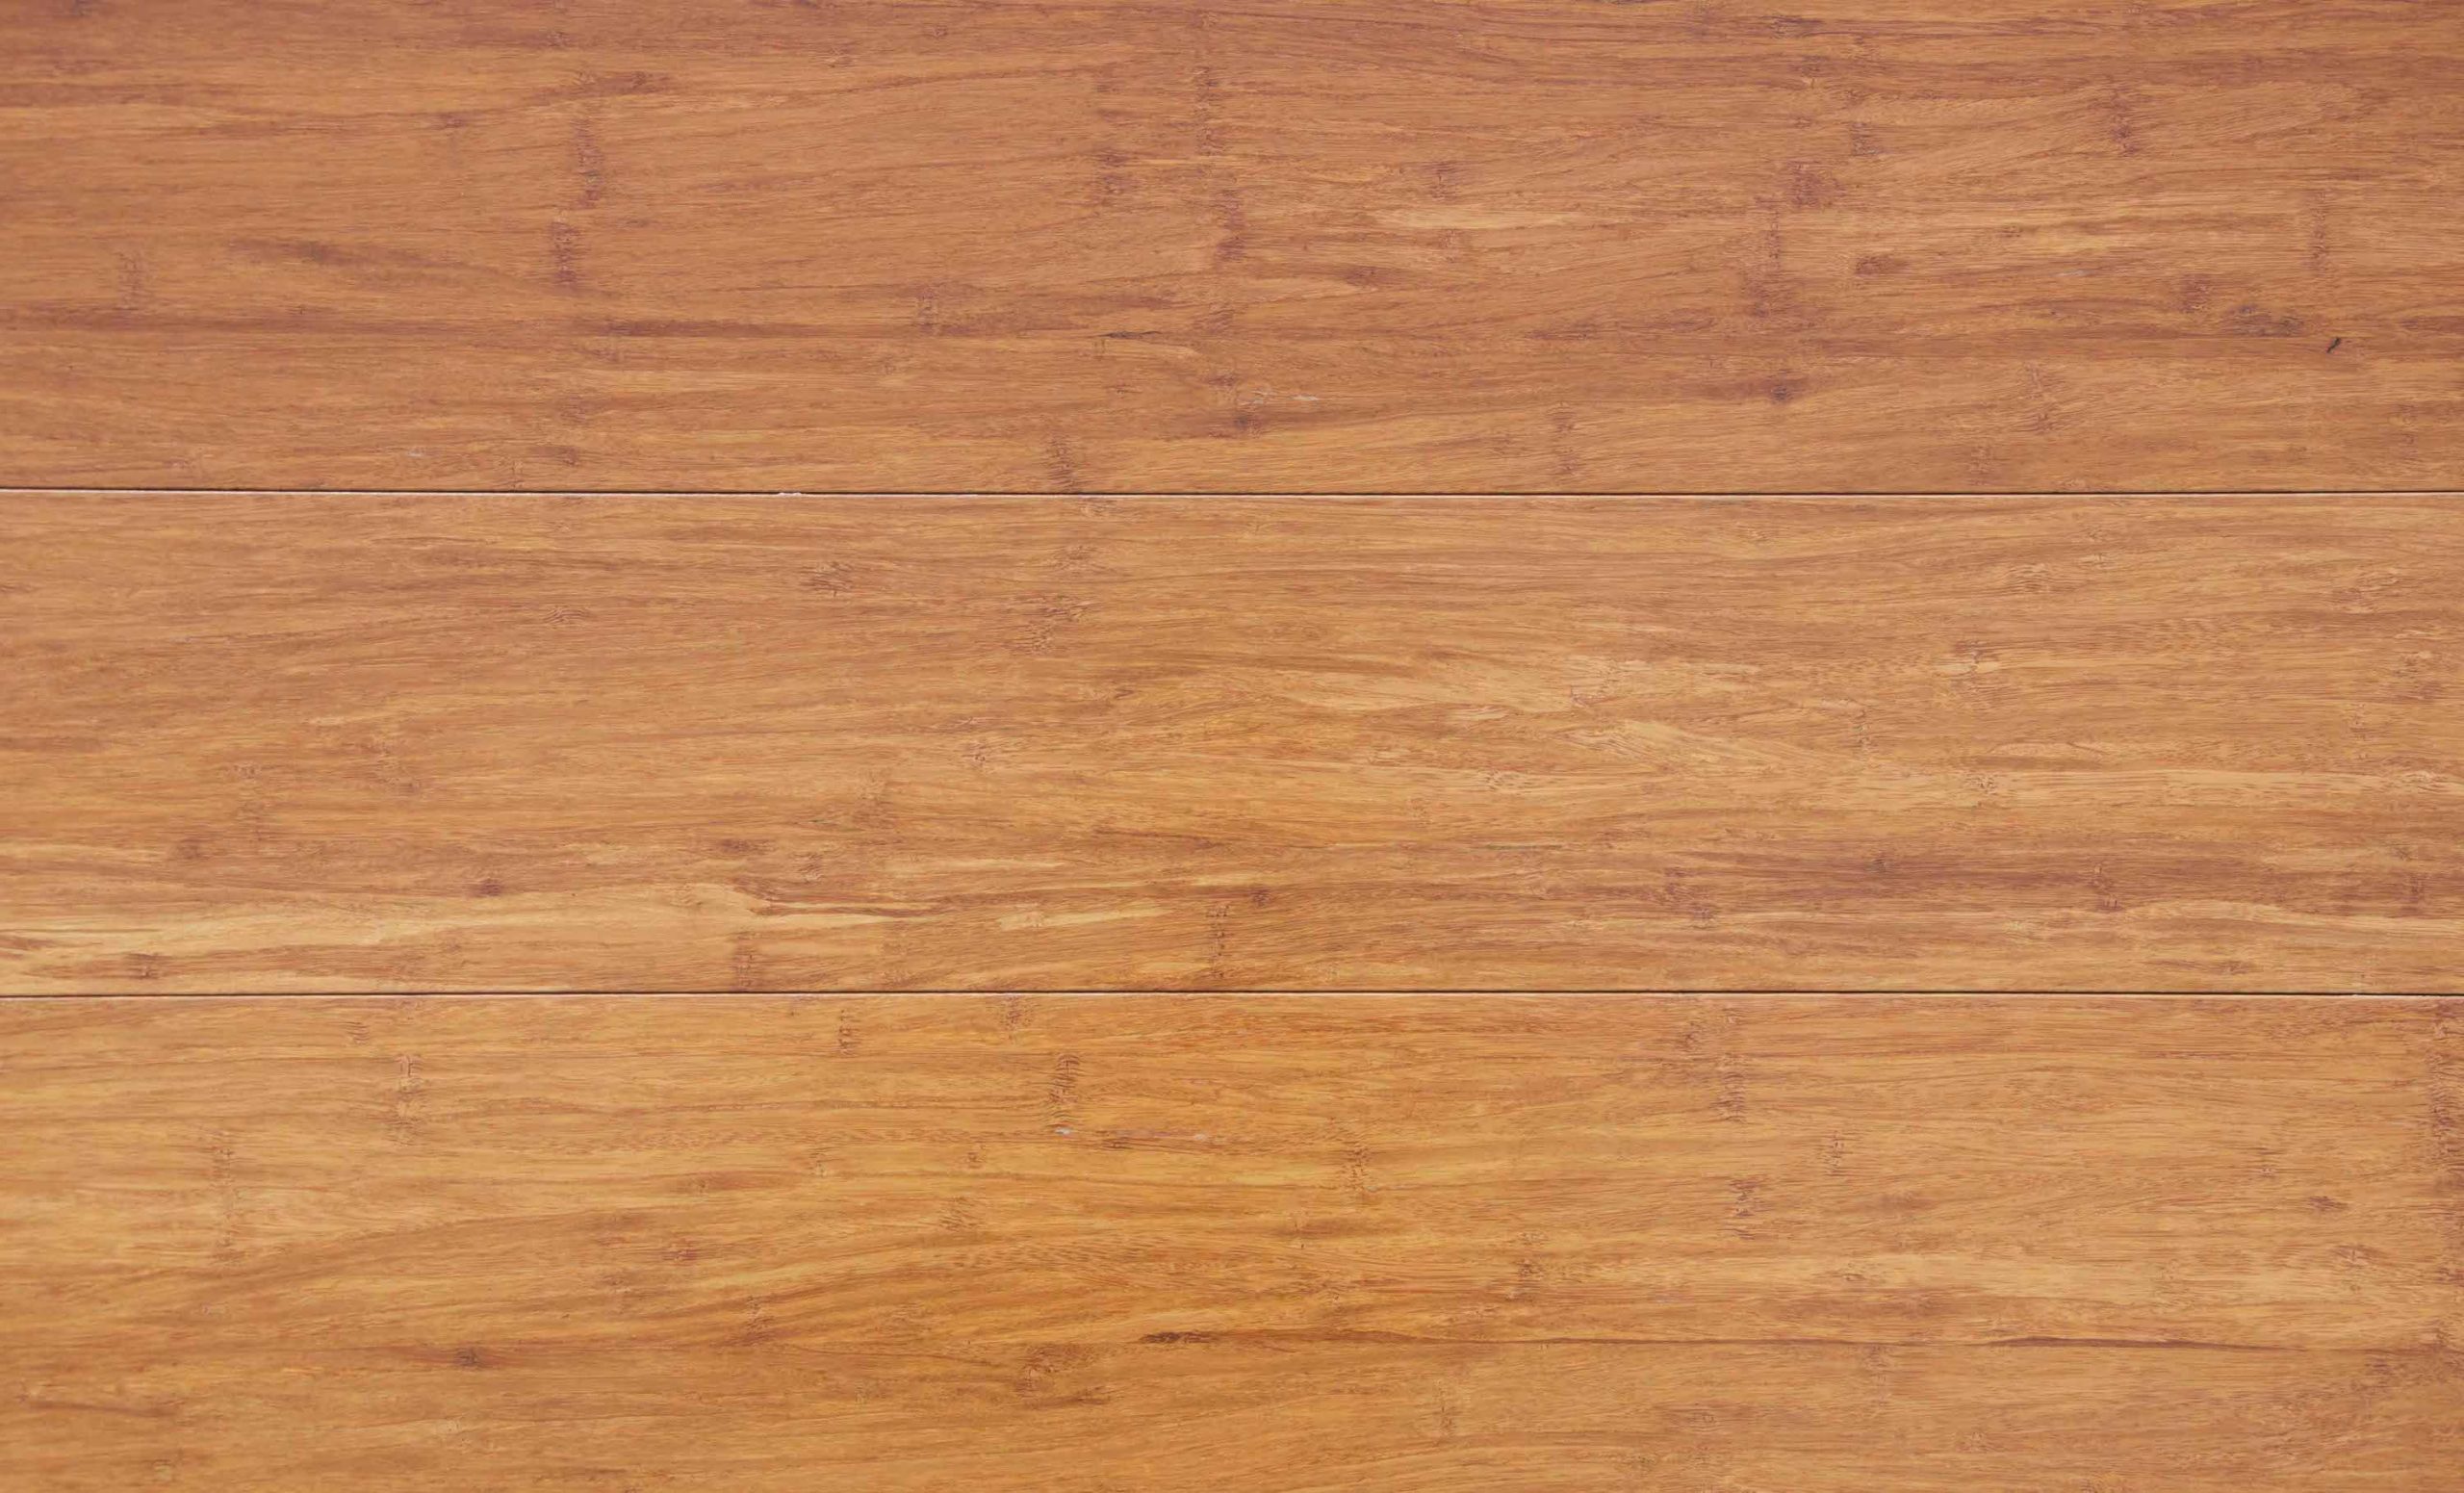 Bamboo Flooring Strand Woven Caramel Click Profile Page Of ... concernant Parquet Bambou Massif À Clipser